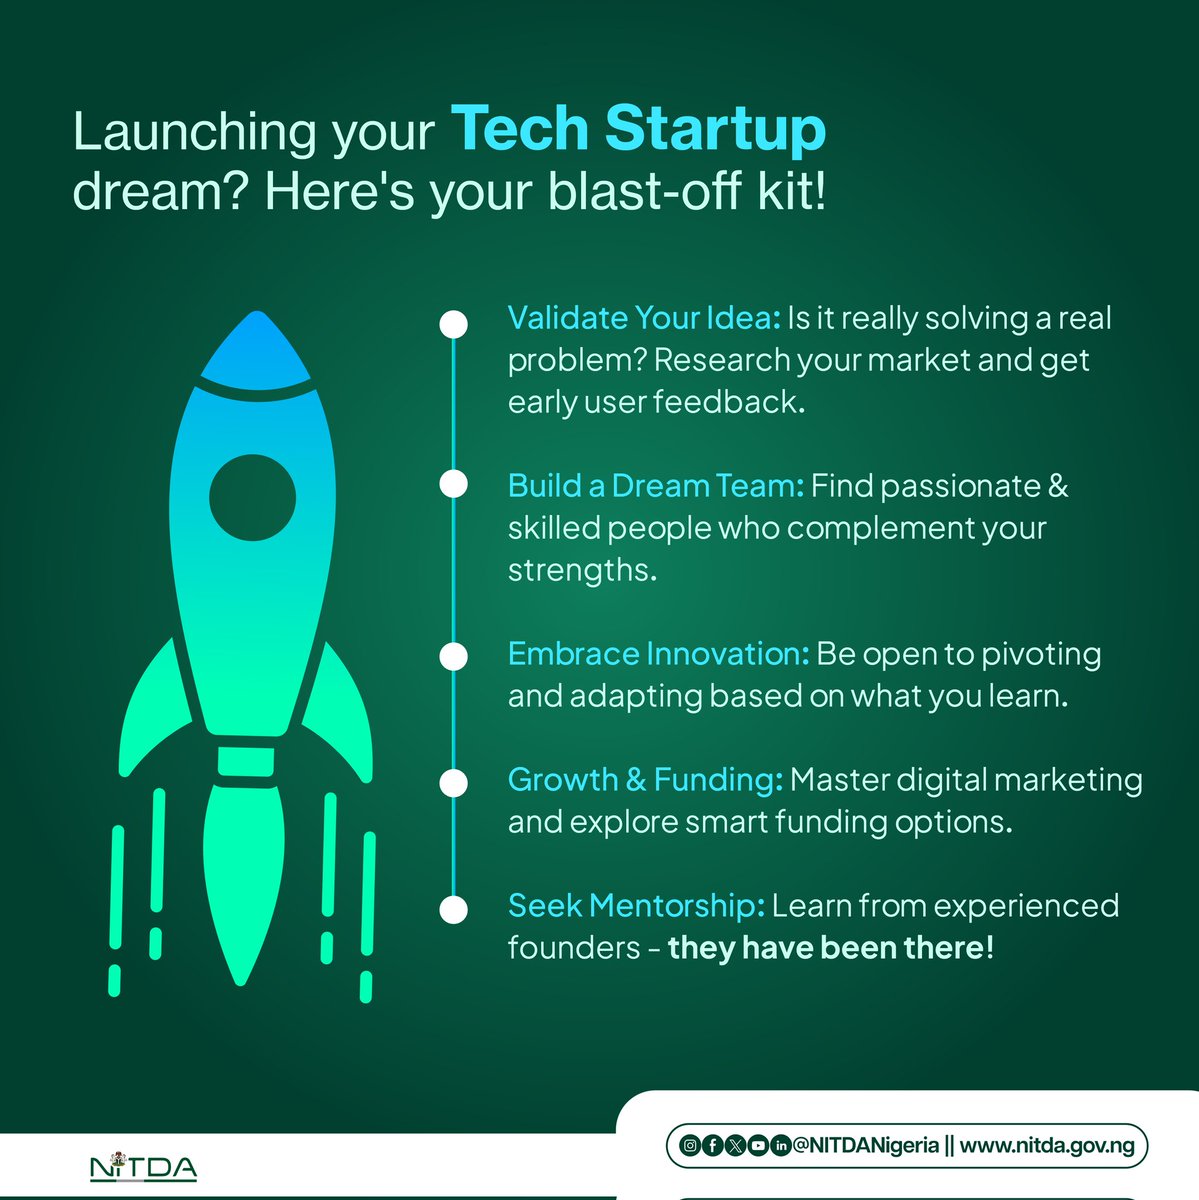 Are you launching your Tech Startup dream? Here's your blast-off kit! #StartupTalks